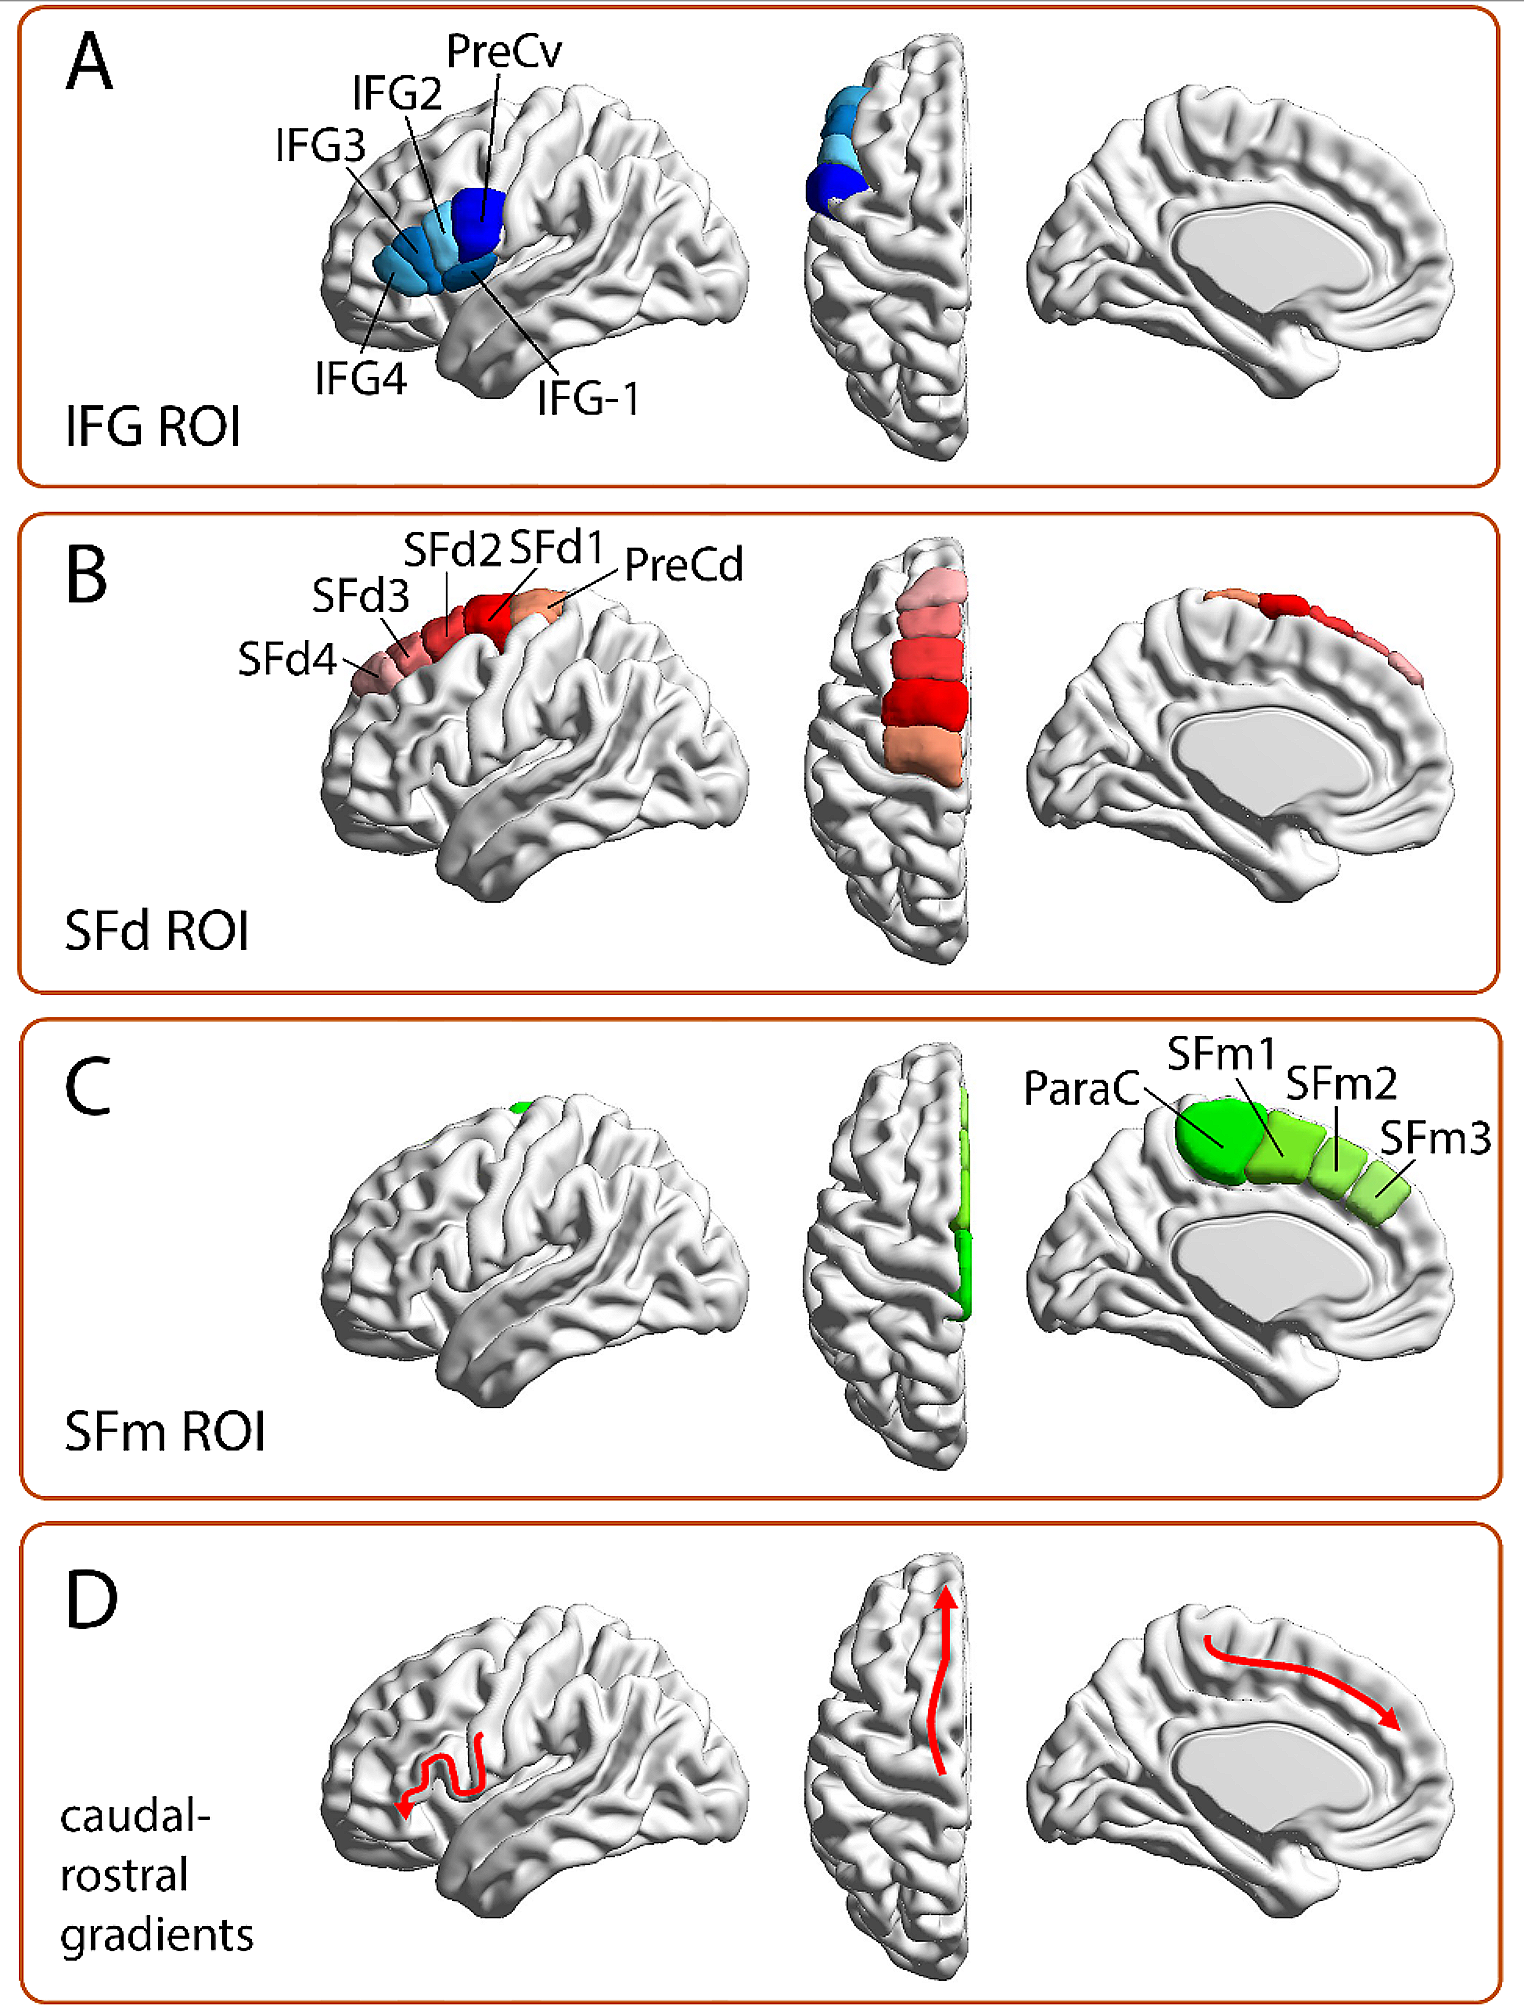 A revision of the dorsal origin of the frontal aslant tract (FAT) in the superior frontal gyrus: a DWI-tractographic study